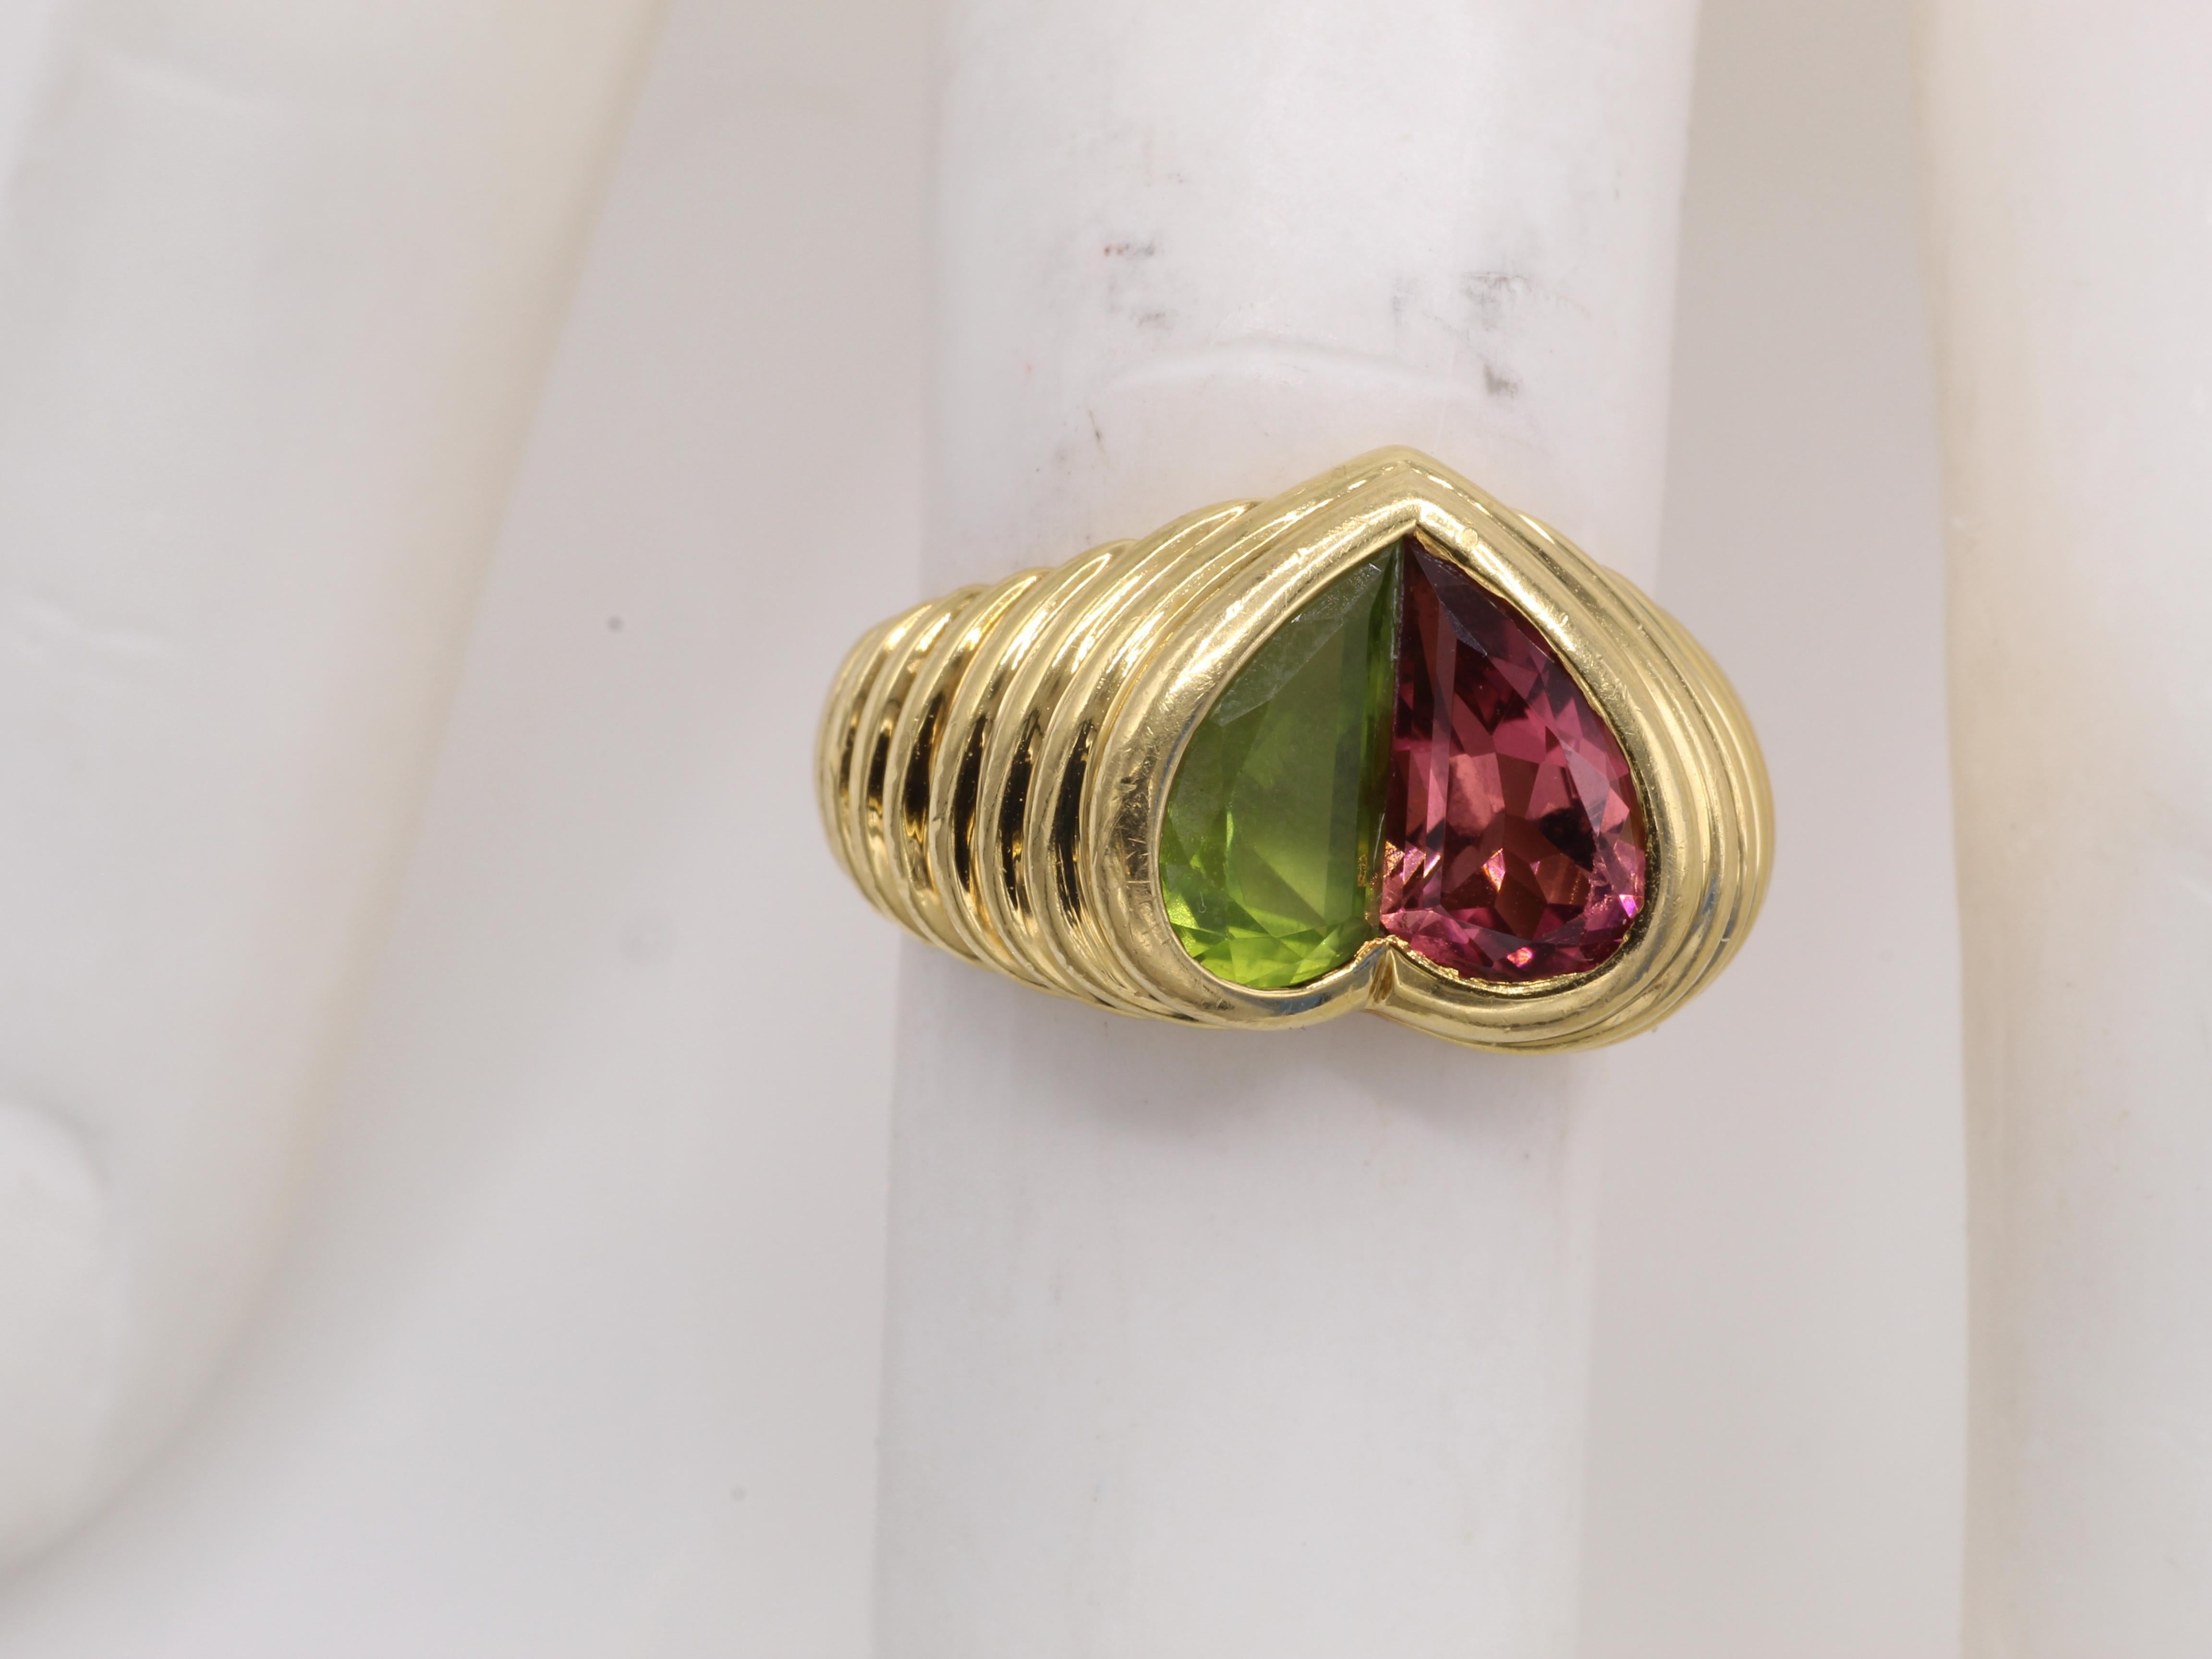 Beautifully designed and masterfully handcrafted by the renown Italian jeweler Bulgari this ring features 2 halves of one heart set with a vibrant pink tourmaline and peridot. 18 karat yellow gold and signed on the inside of the shank BVLGARI, 750